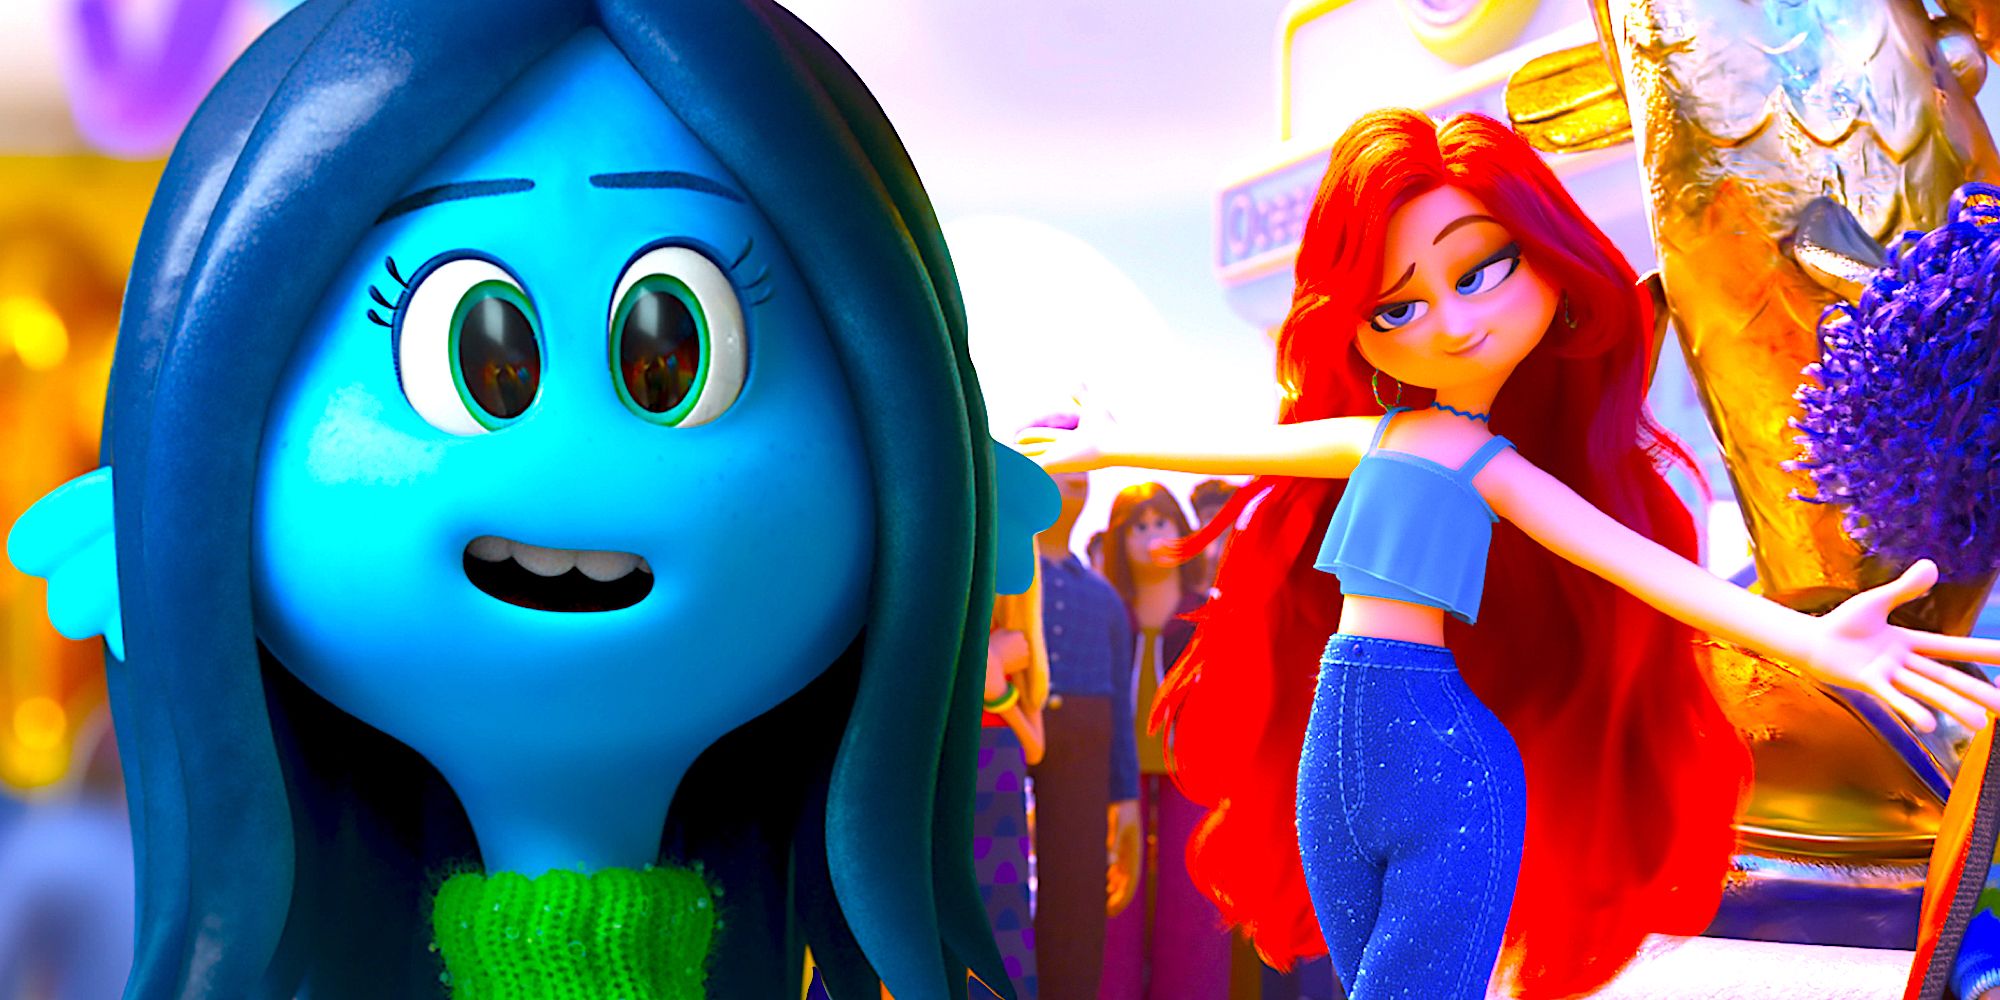 10 Biggest Reasons DreamWorks’ New Animated Movie Bombed So Badly At The Box Office